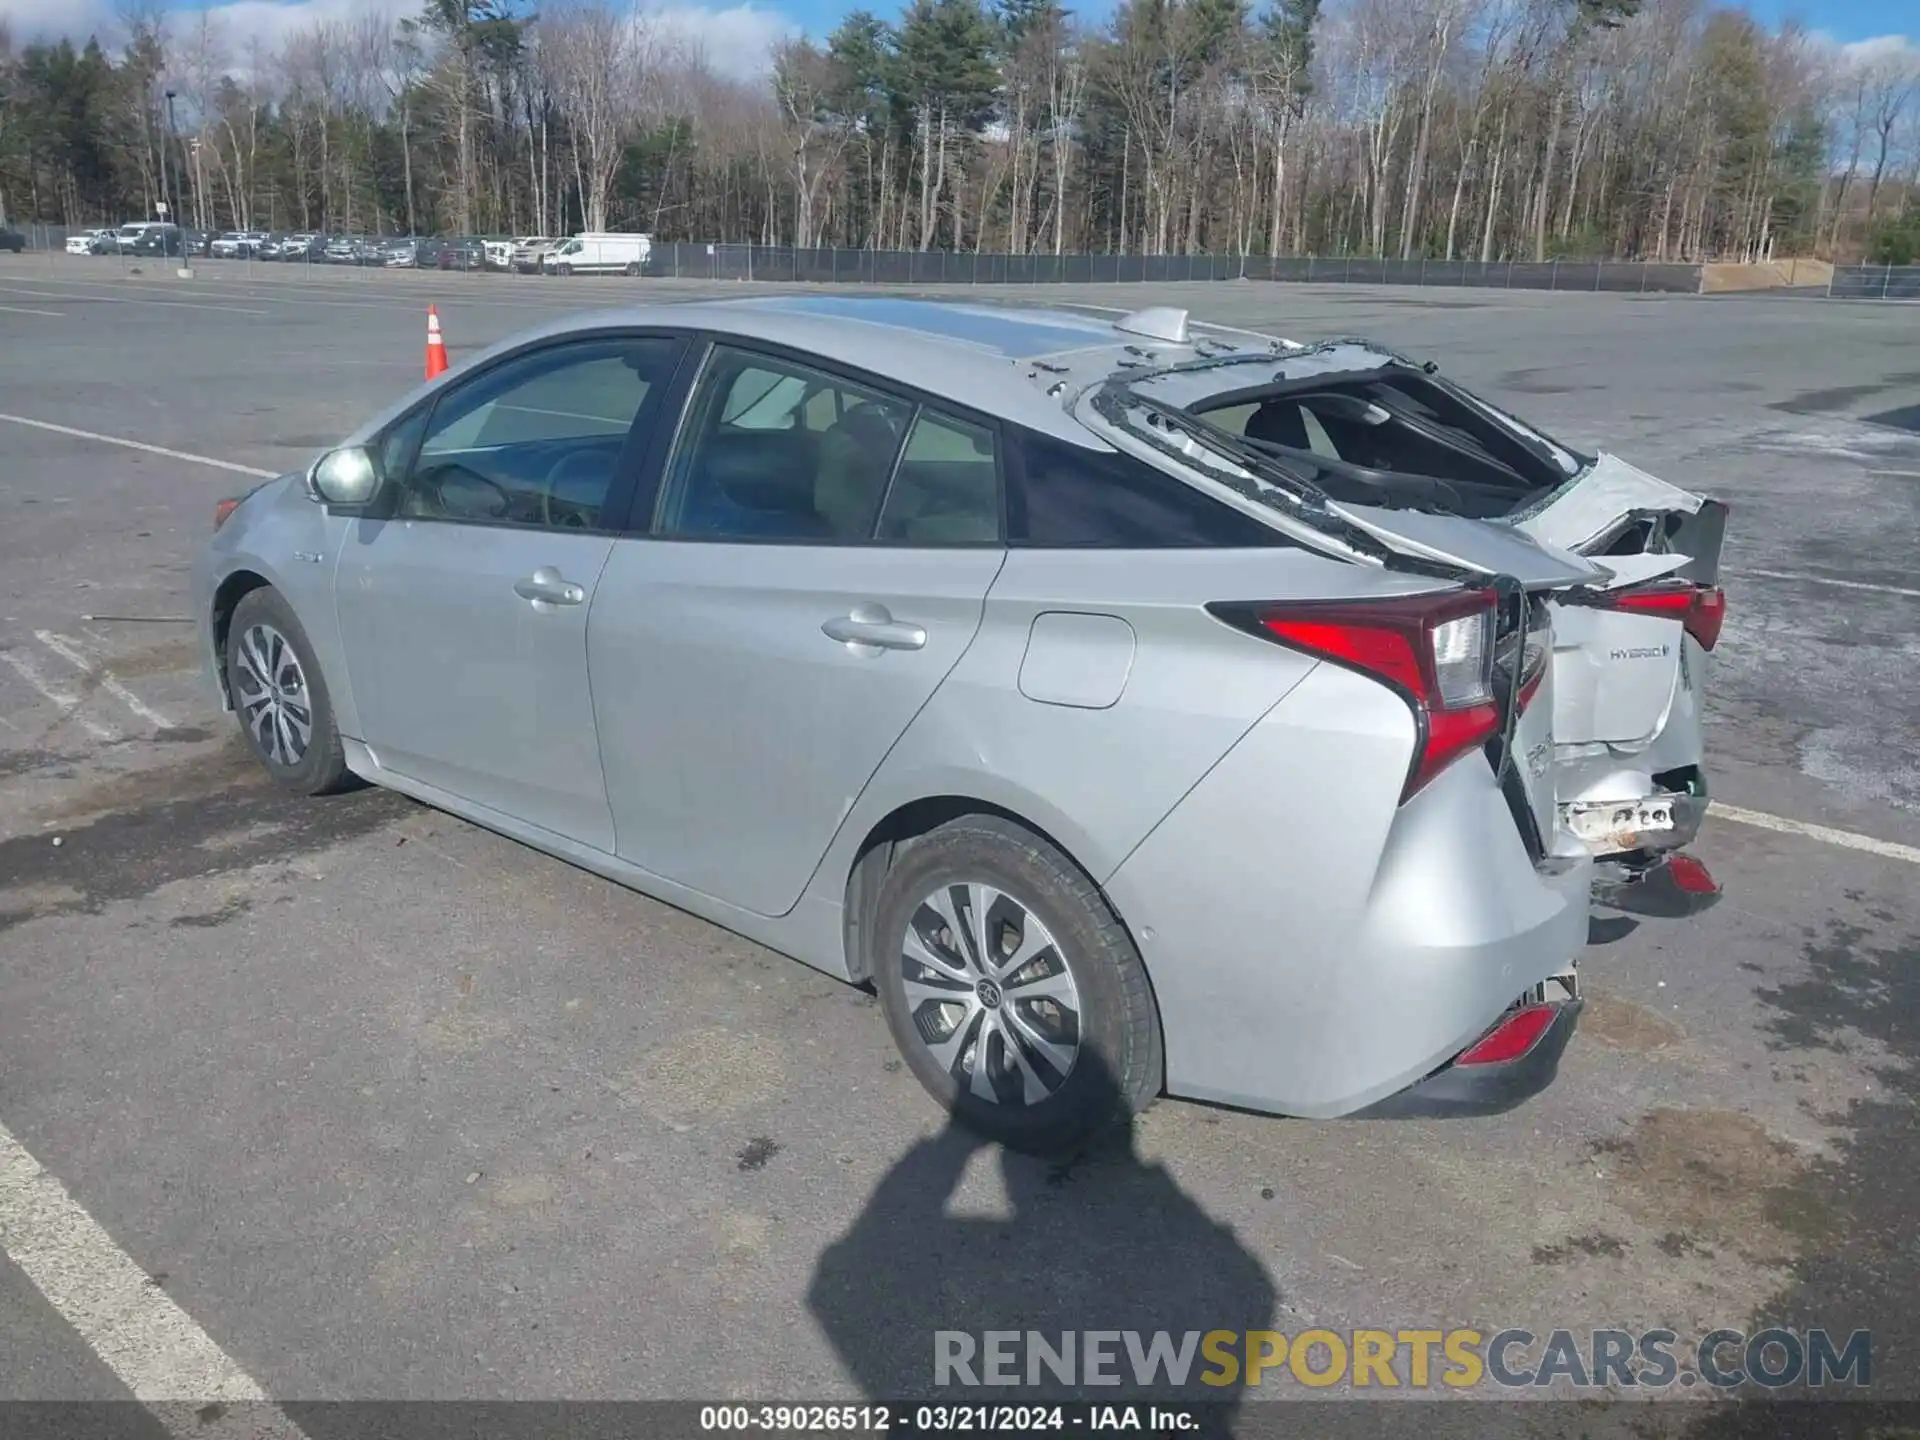 3 Photograph of a damaged car JTDL9MFUXN3037020 TOYOTA PRIUS 2022